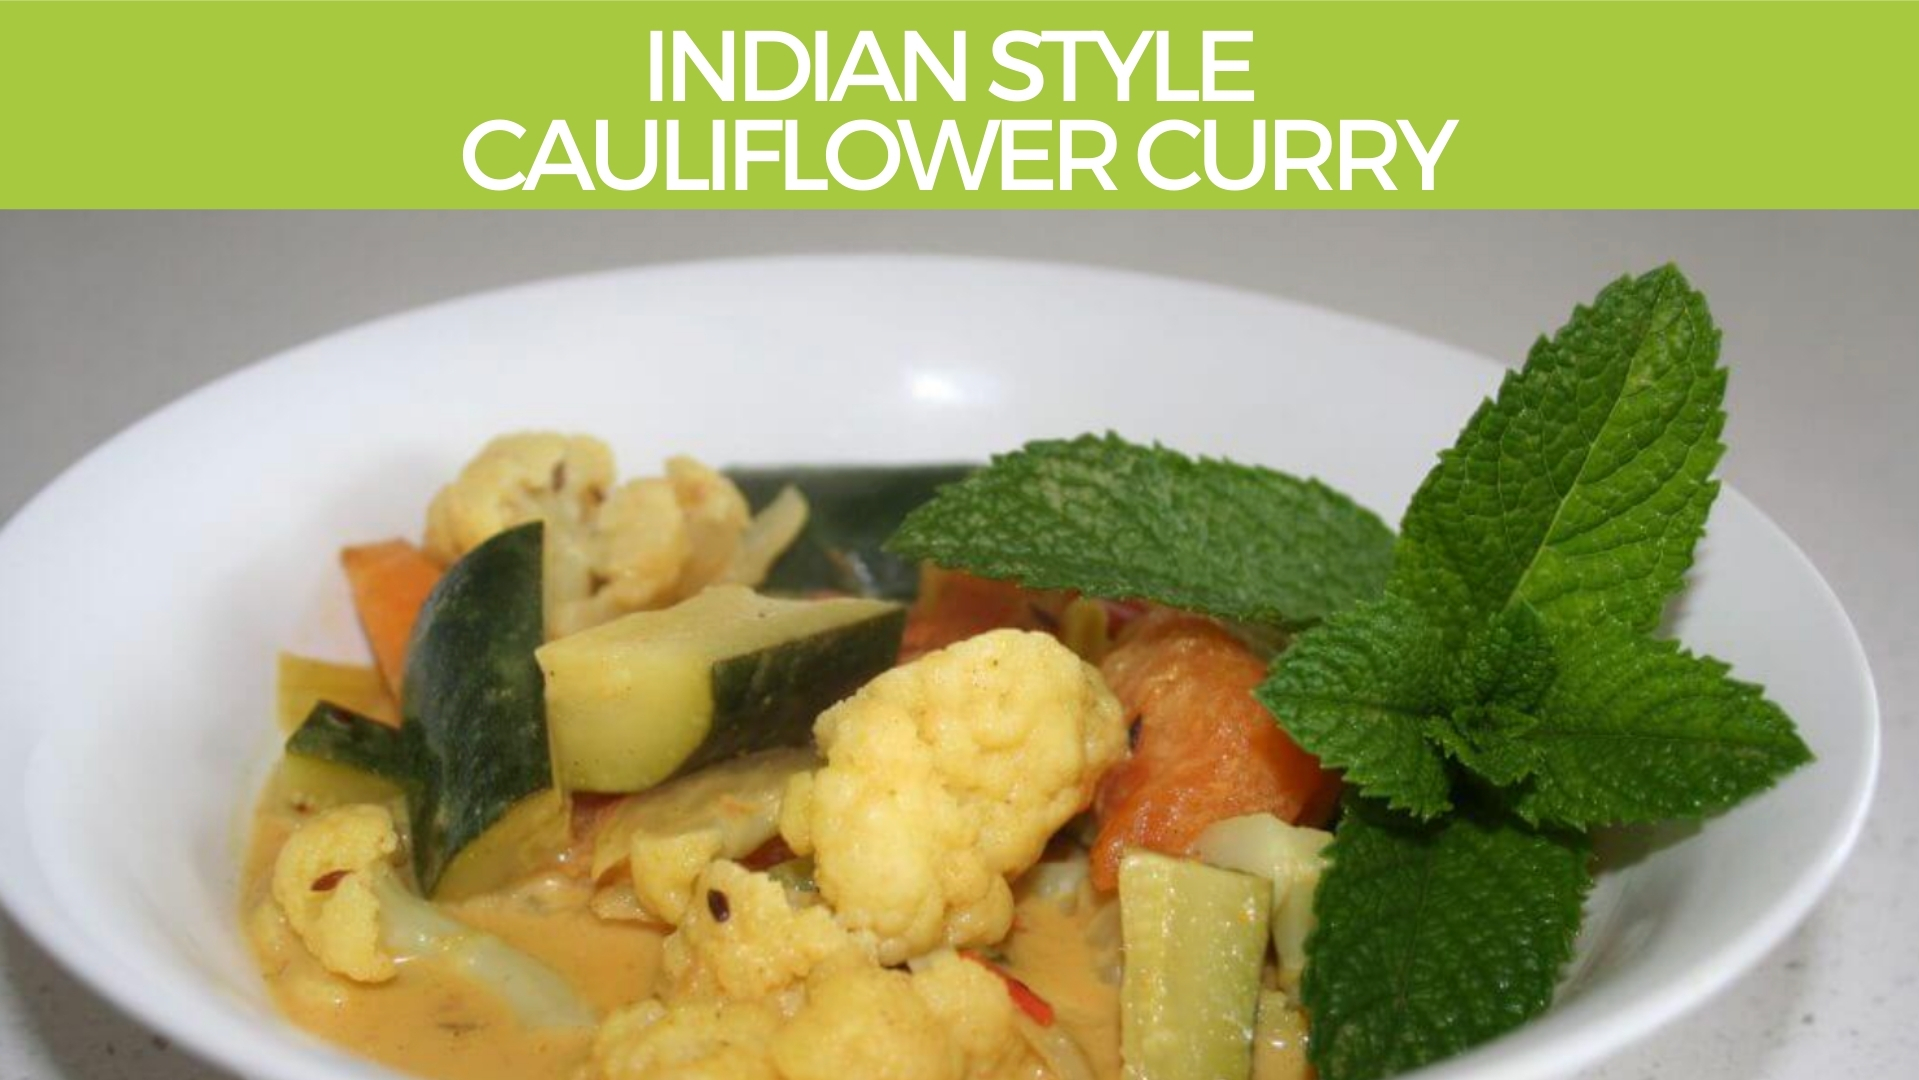 Indian Style Cauliflower Curry